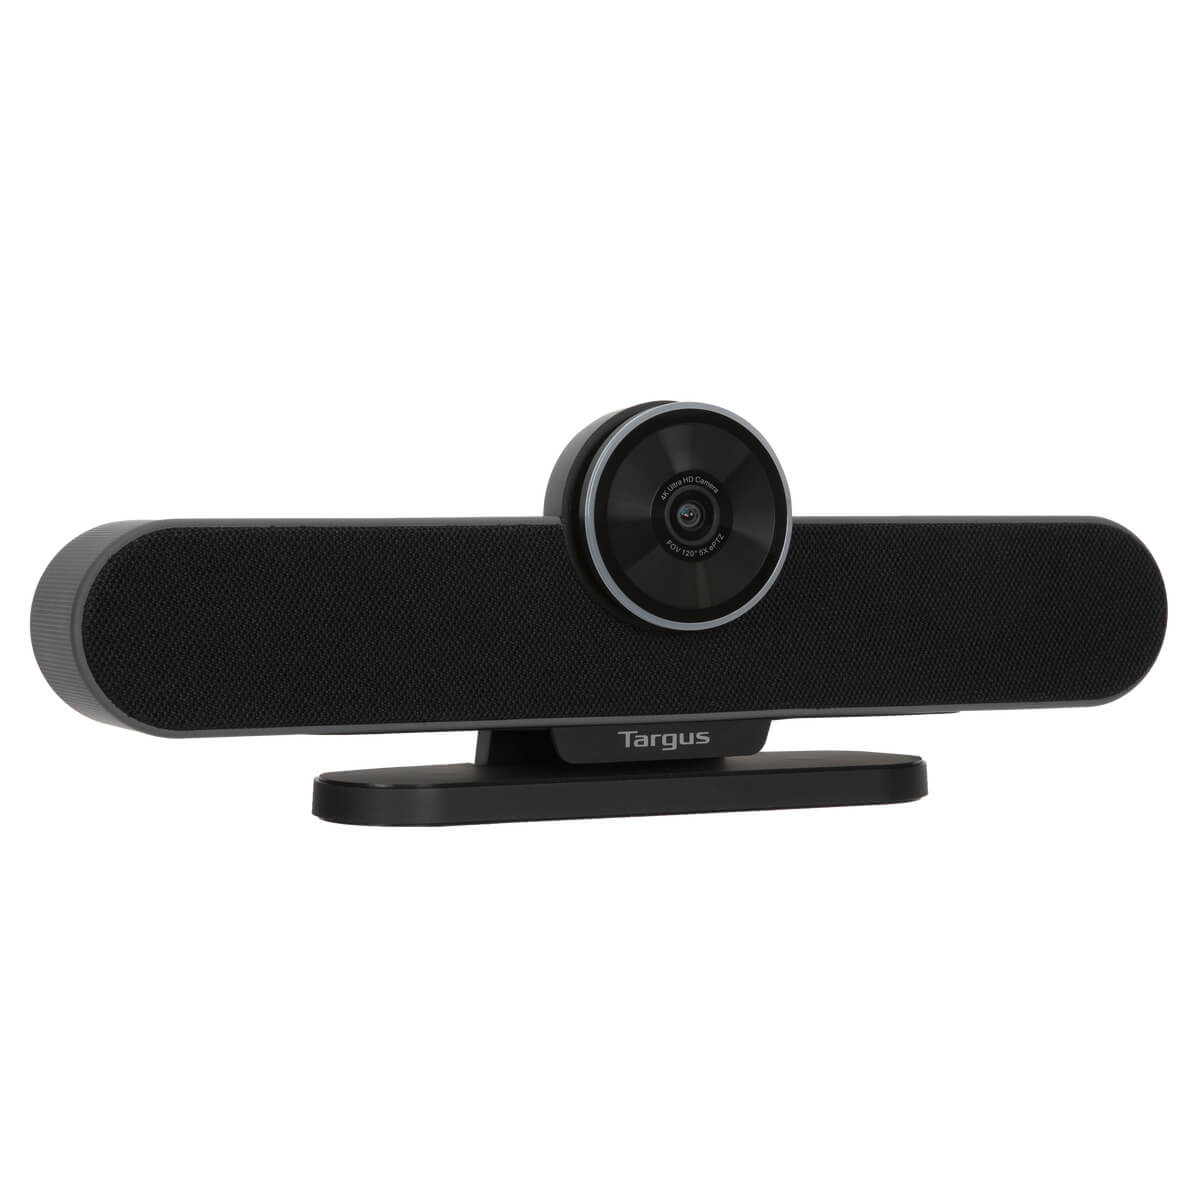 Targus All-in-One 4K Video Conference System (UK Plug)